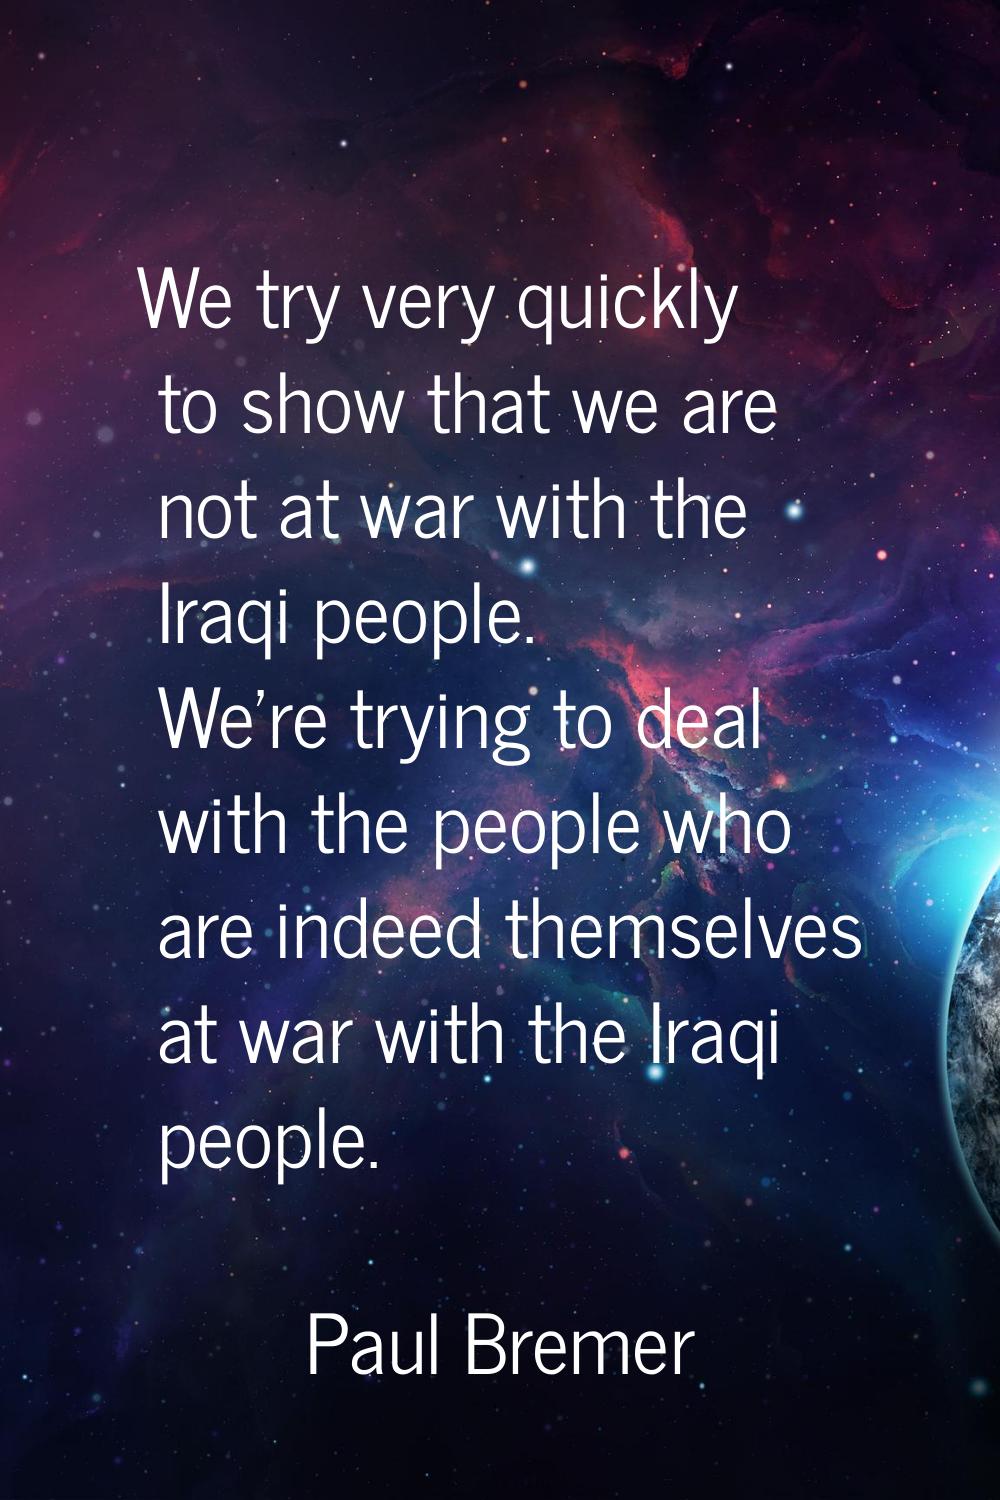 We try very quickly to show that we are not at war with the Iraqi people. We're trying to deal with